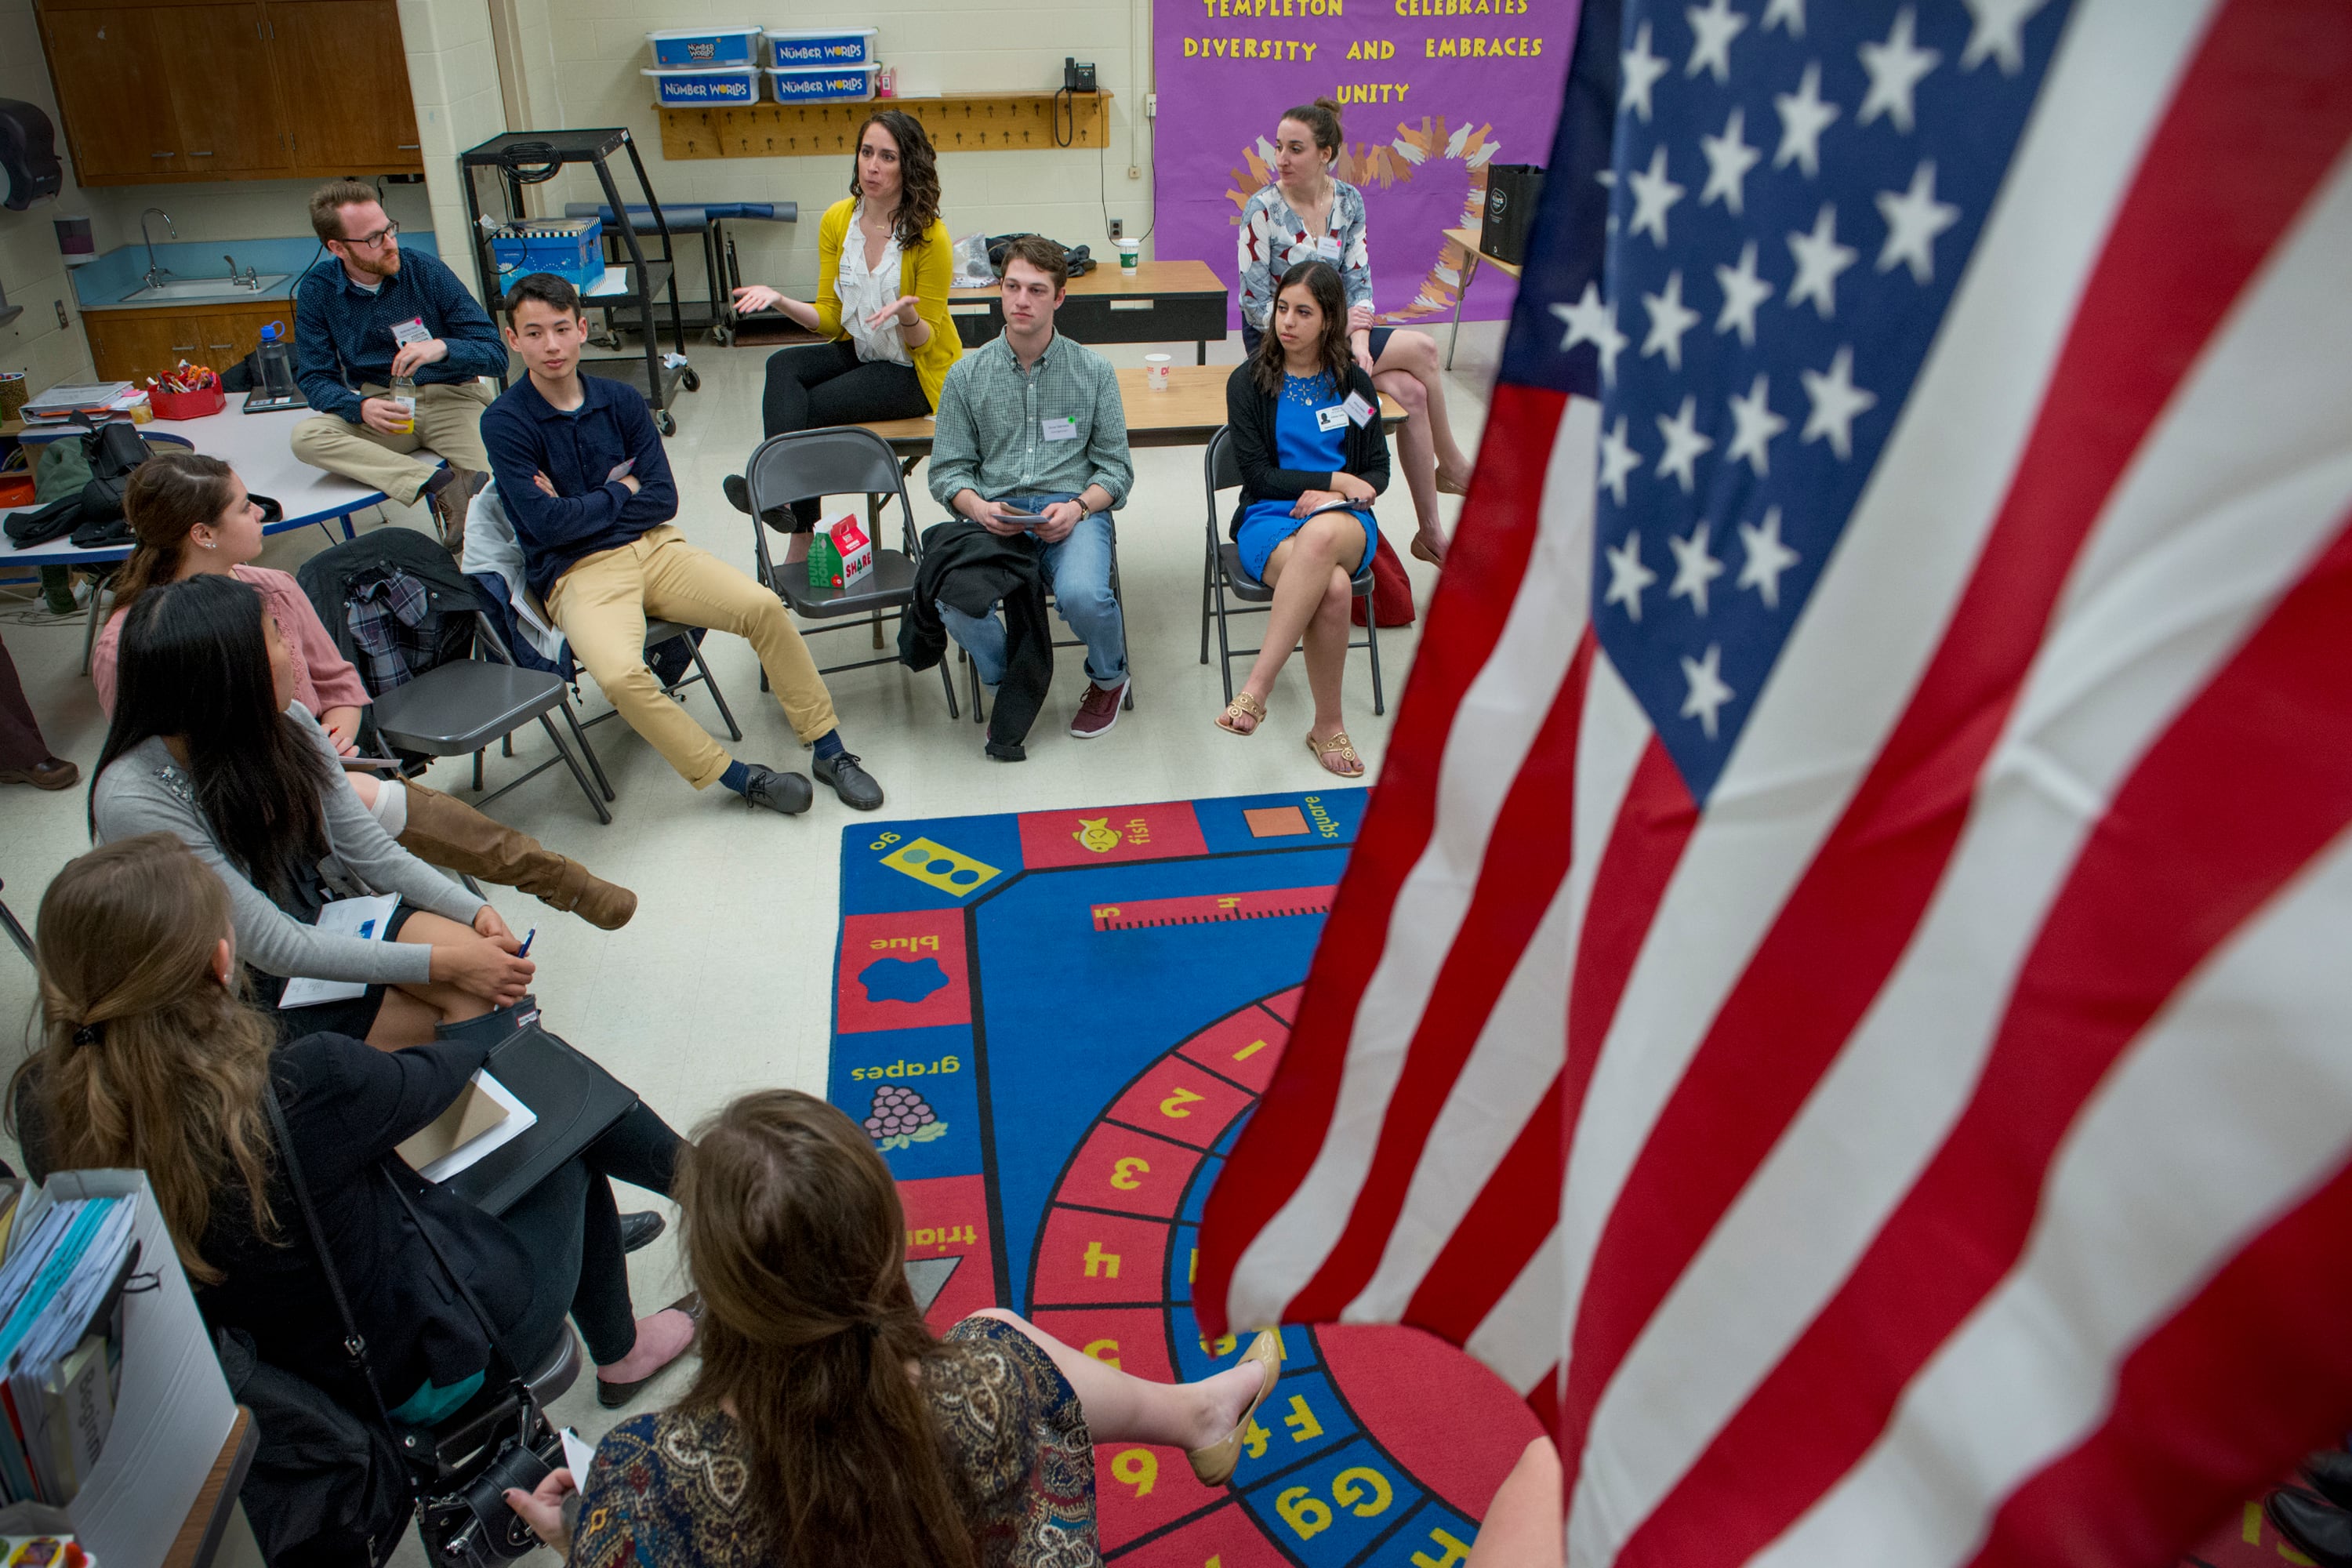 A large American flag hangs in the right foreground while, in the background, people sit in chairs around a colorful rug in a classroom.